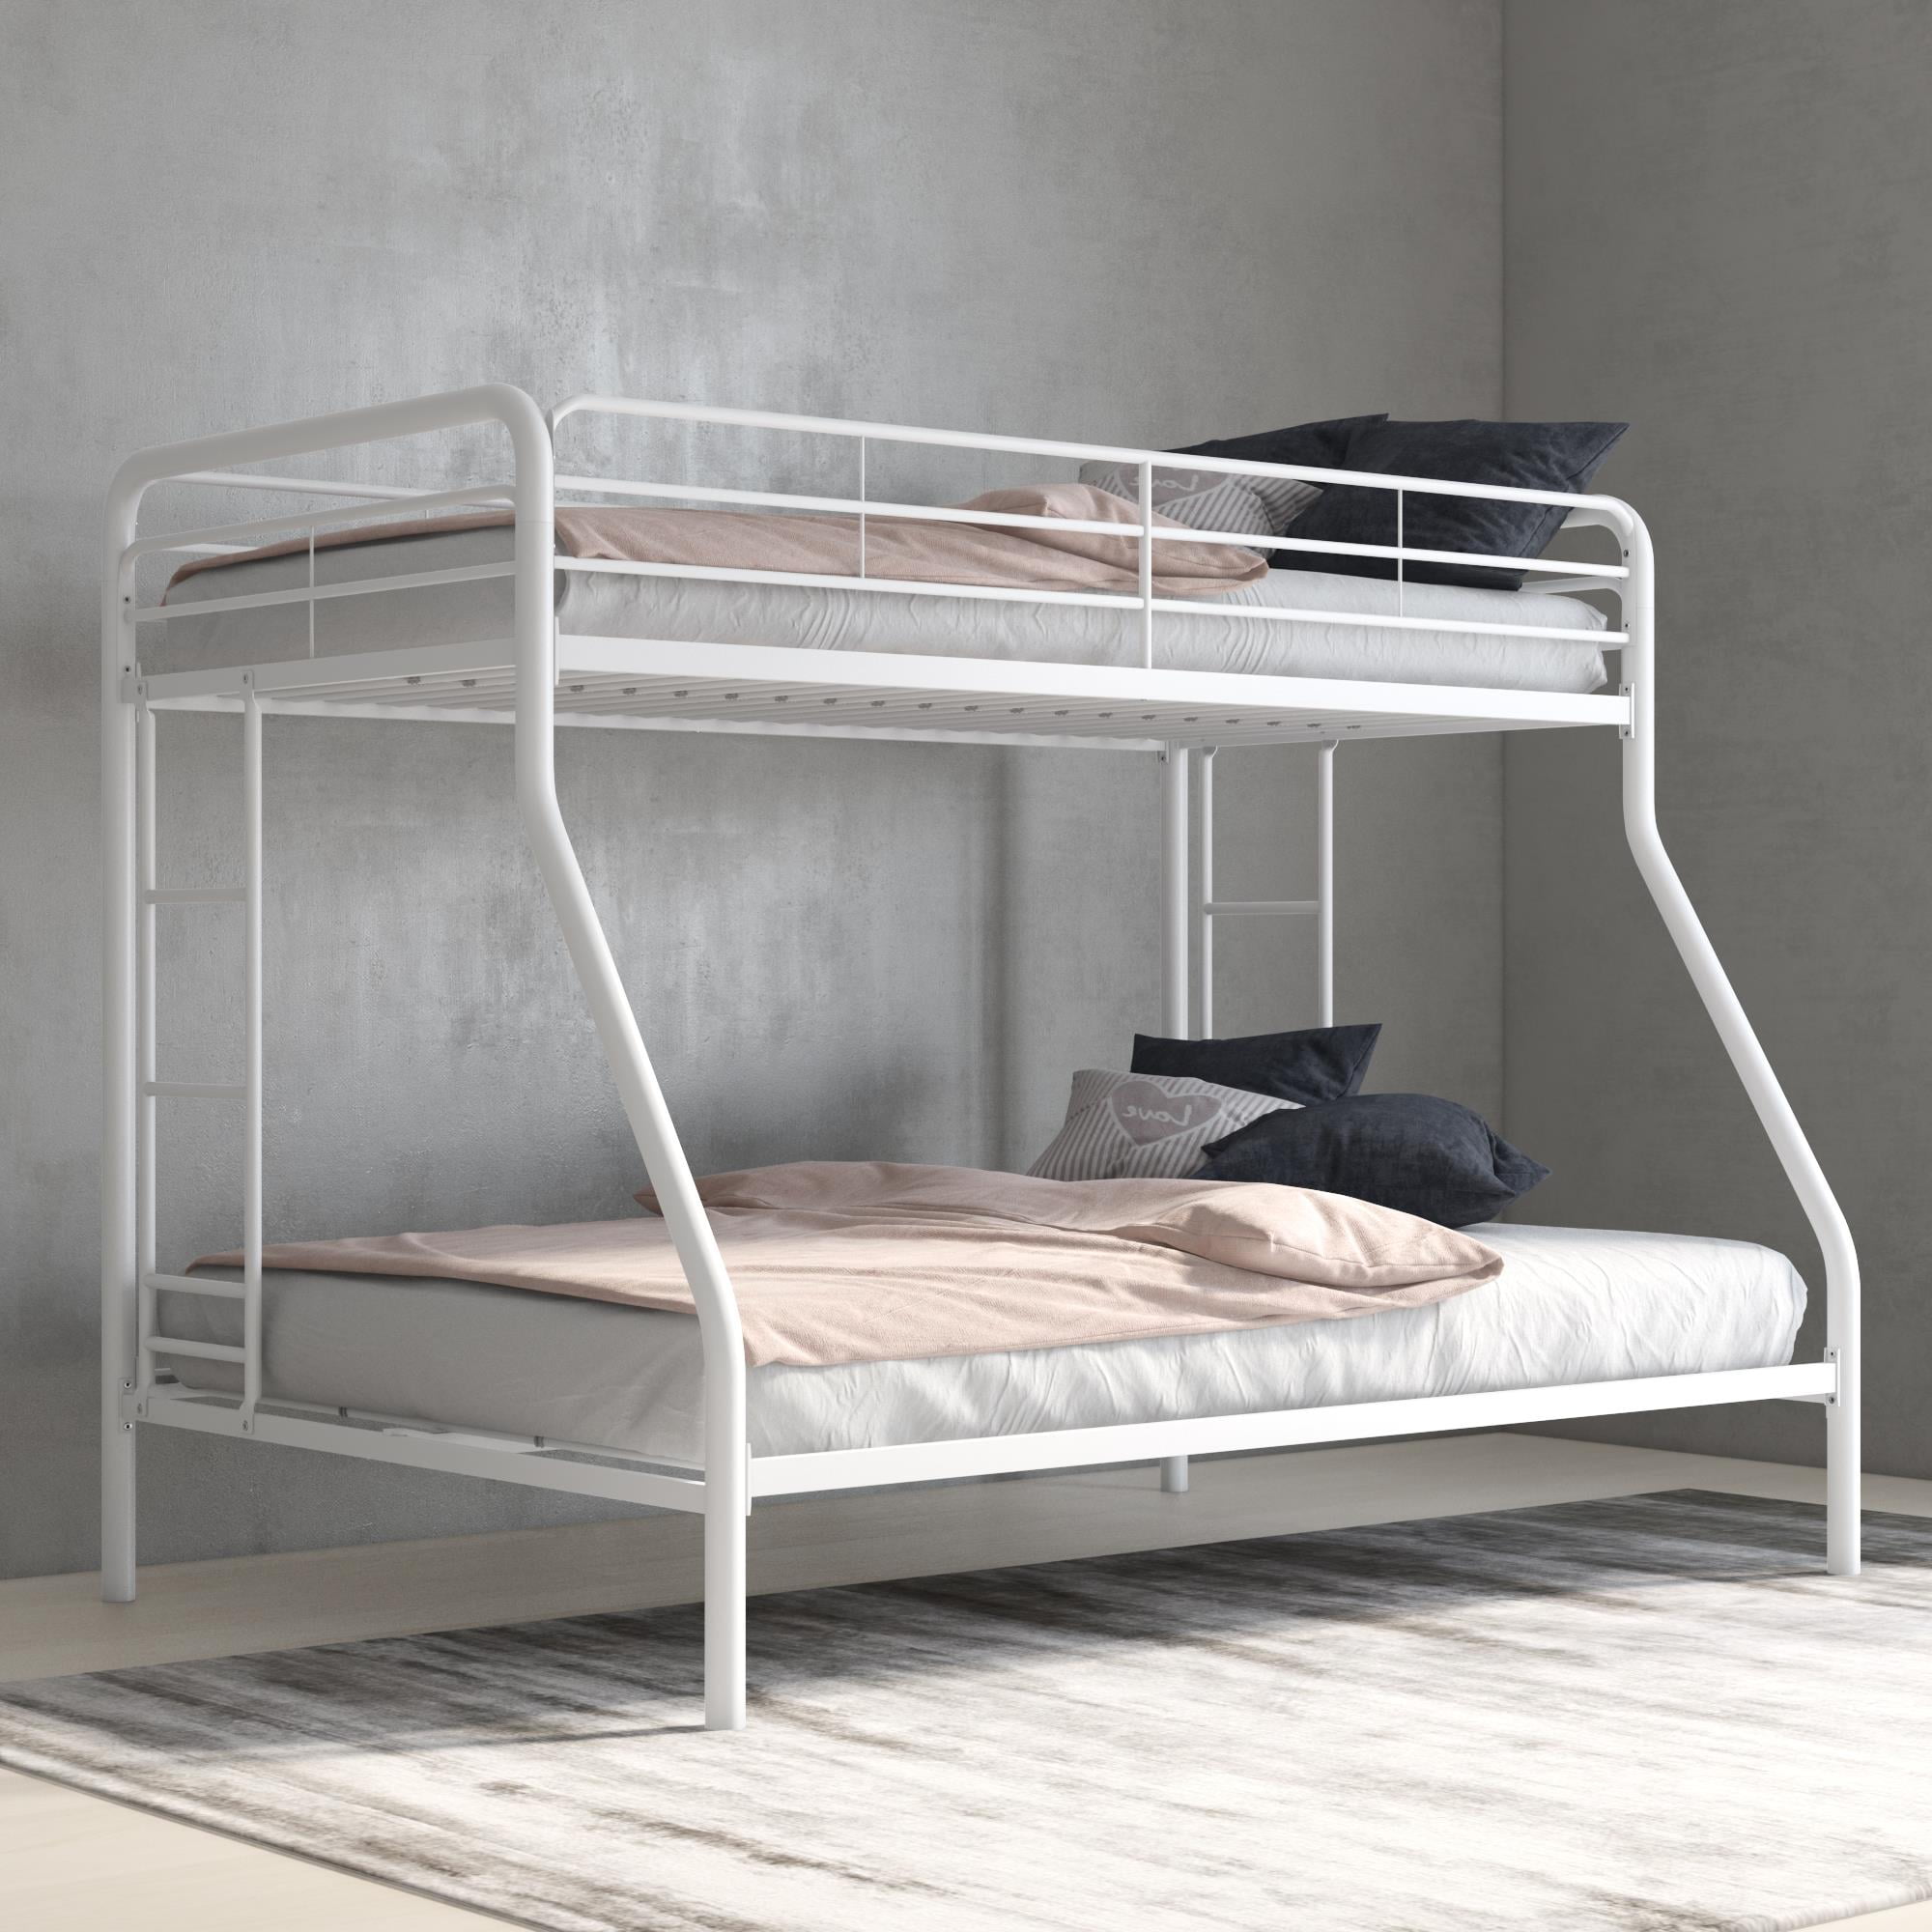 Dhp Twin Over Full Metal Bunk Bed Frame, Weight Limit For Top Bunk Bed